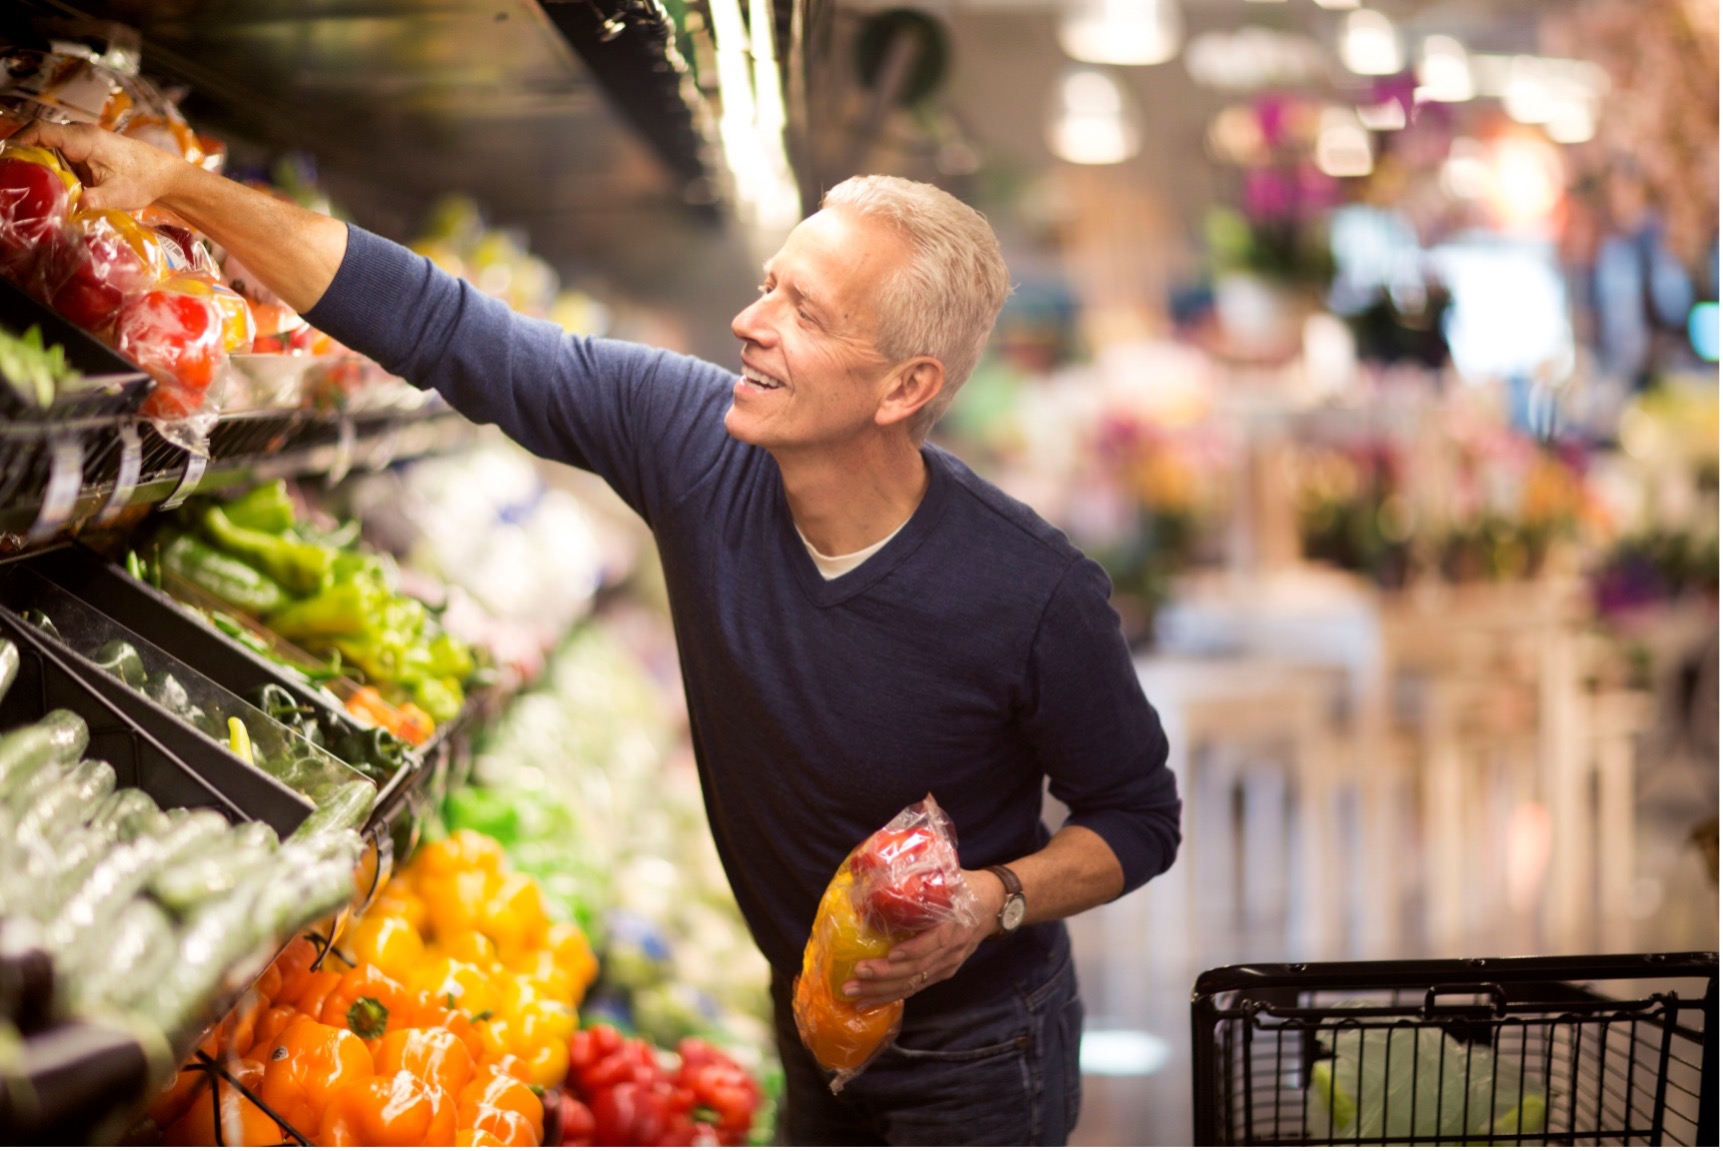 Man in produce section of grocery store holding bell peppers.